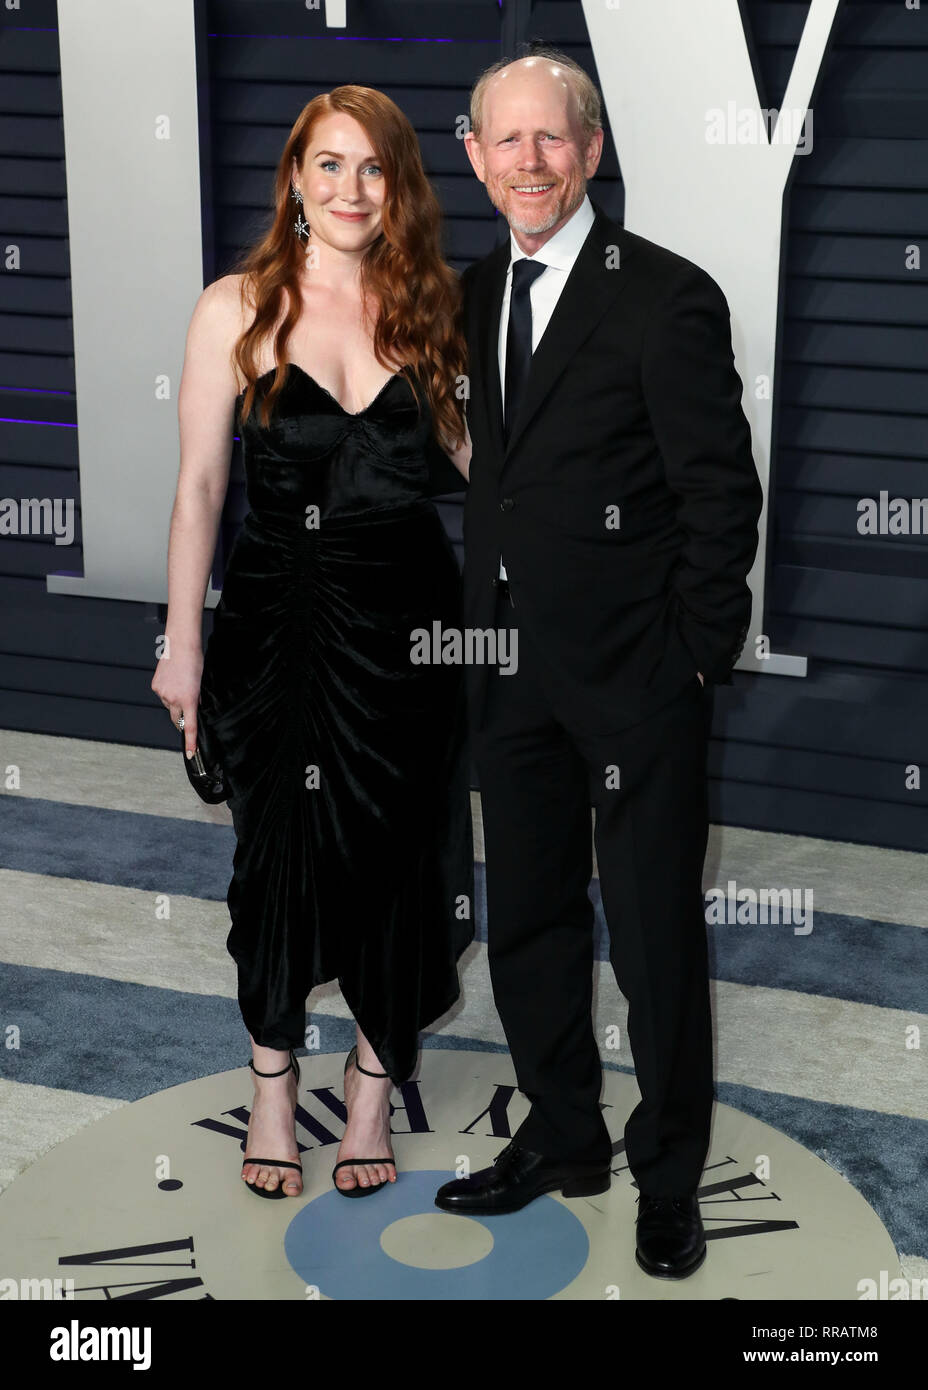 BEVERLY HILLS, LOS ANGELES, CA, USA - FEBRUARY 24: Paige Howard and father Ron Howard arrive at the 2019 Vanity Fair Oscar Party held at the Wallis Annenberg Center for the Performing Arts on February 24, 2019 in Beverly Hills, Los Angeles, California, United States. (Photo by Xavier Collin/Image Press Agency) Stock Photo